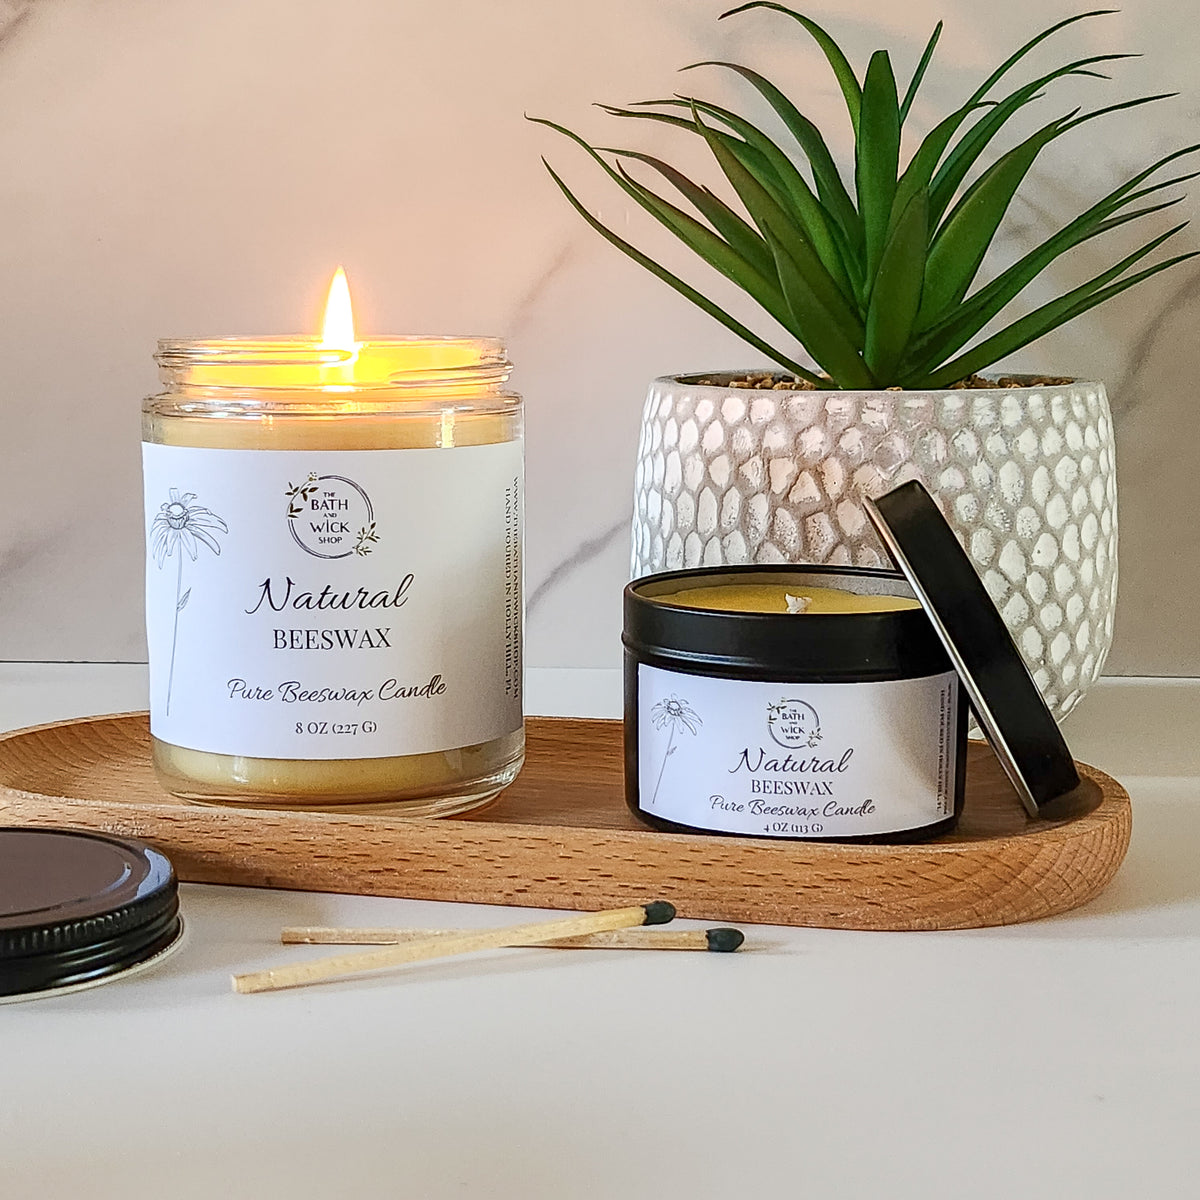 Natural Beeswax (Unscented) Pure Beeswax Candle – The Bath and